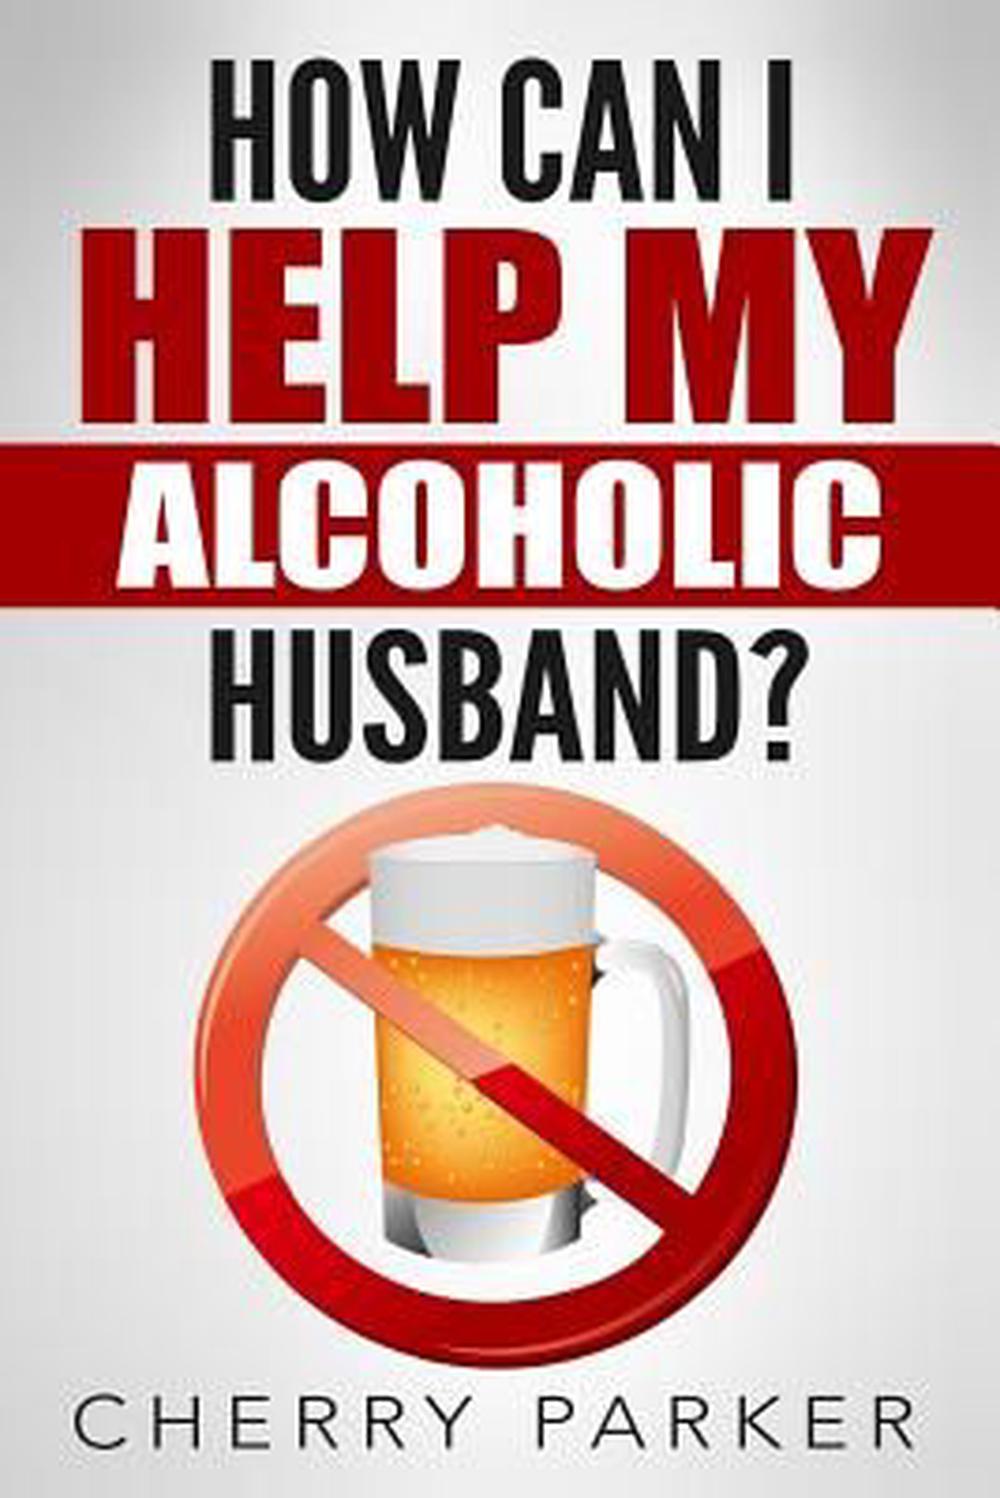 How Can I Help My Alcoholic Husband? by Cherry Parker ...